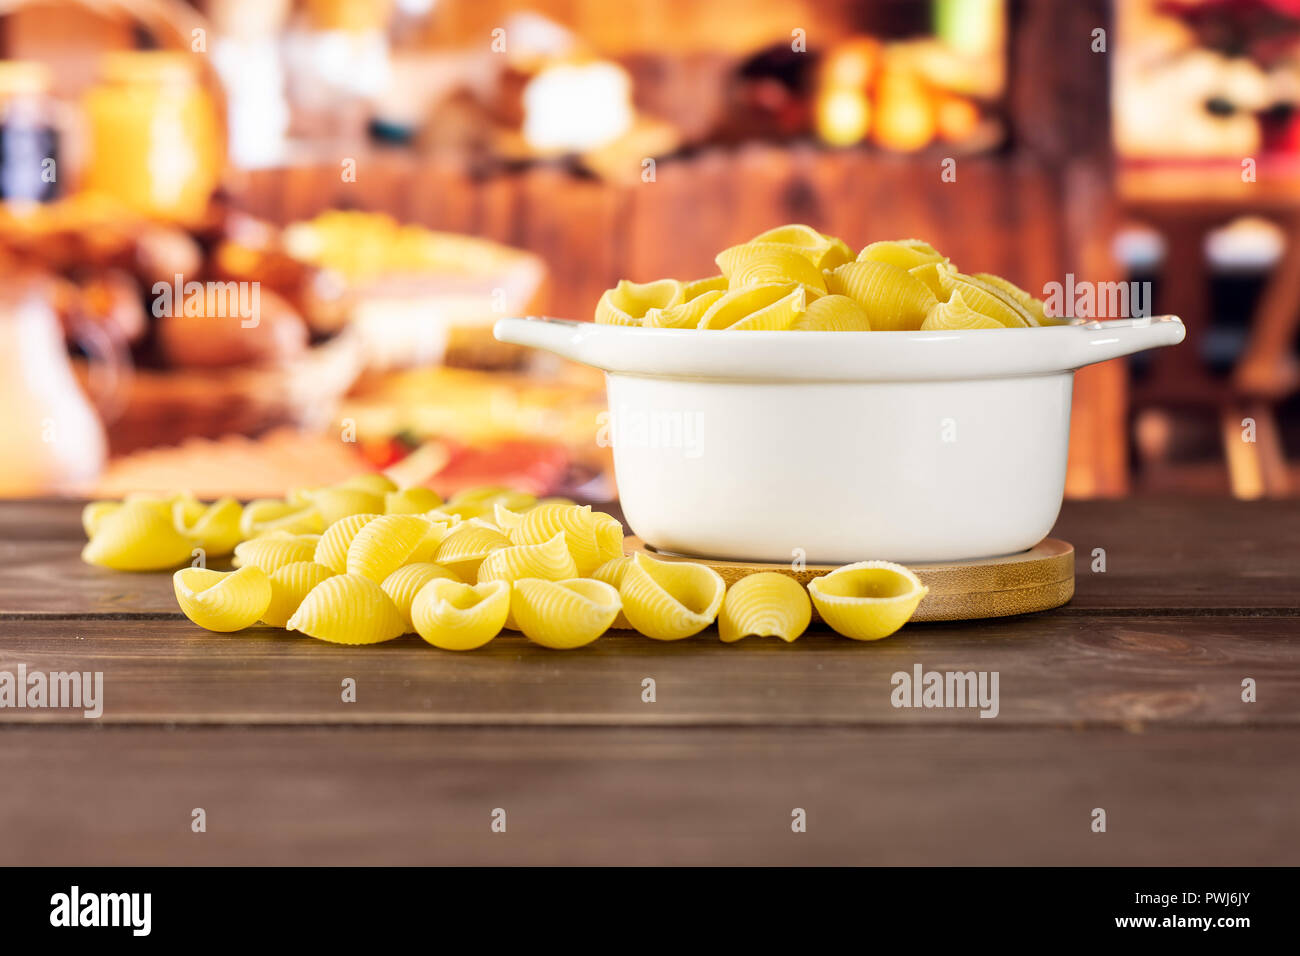 Lot of whole light raw yellow pasta conchiglie variety in a ceramic stewpan with rustic wood kitchen in background Stock Photo